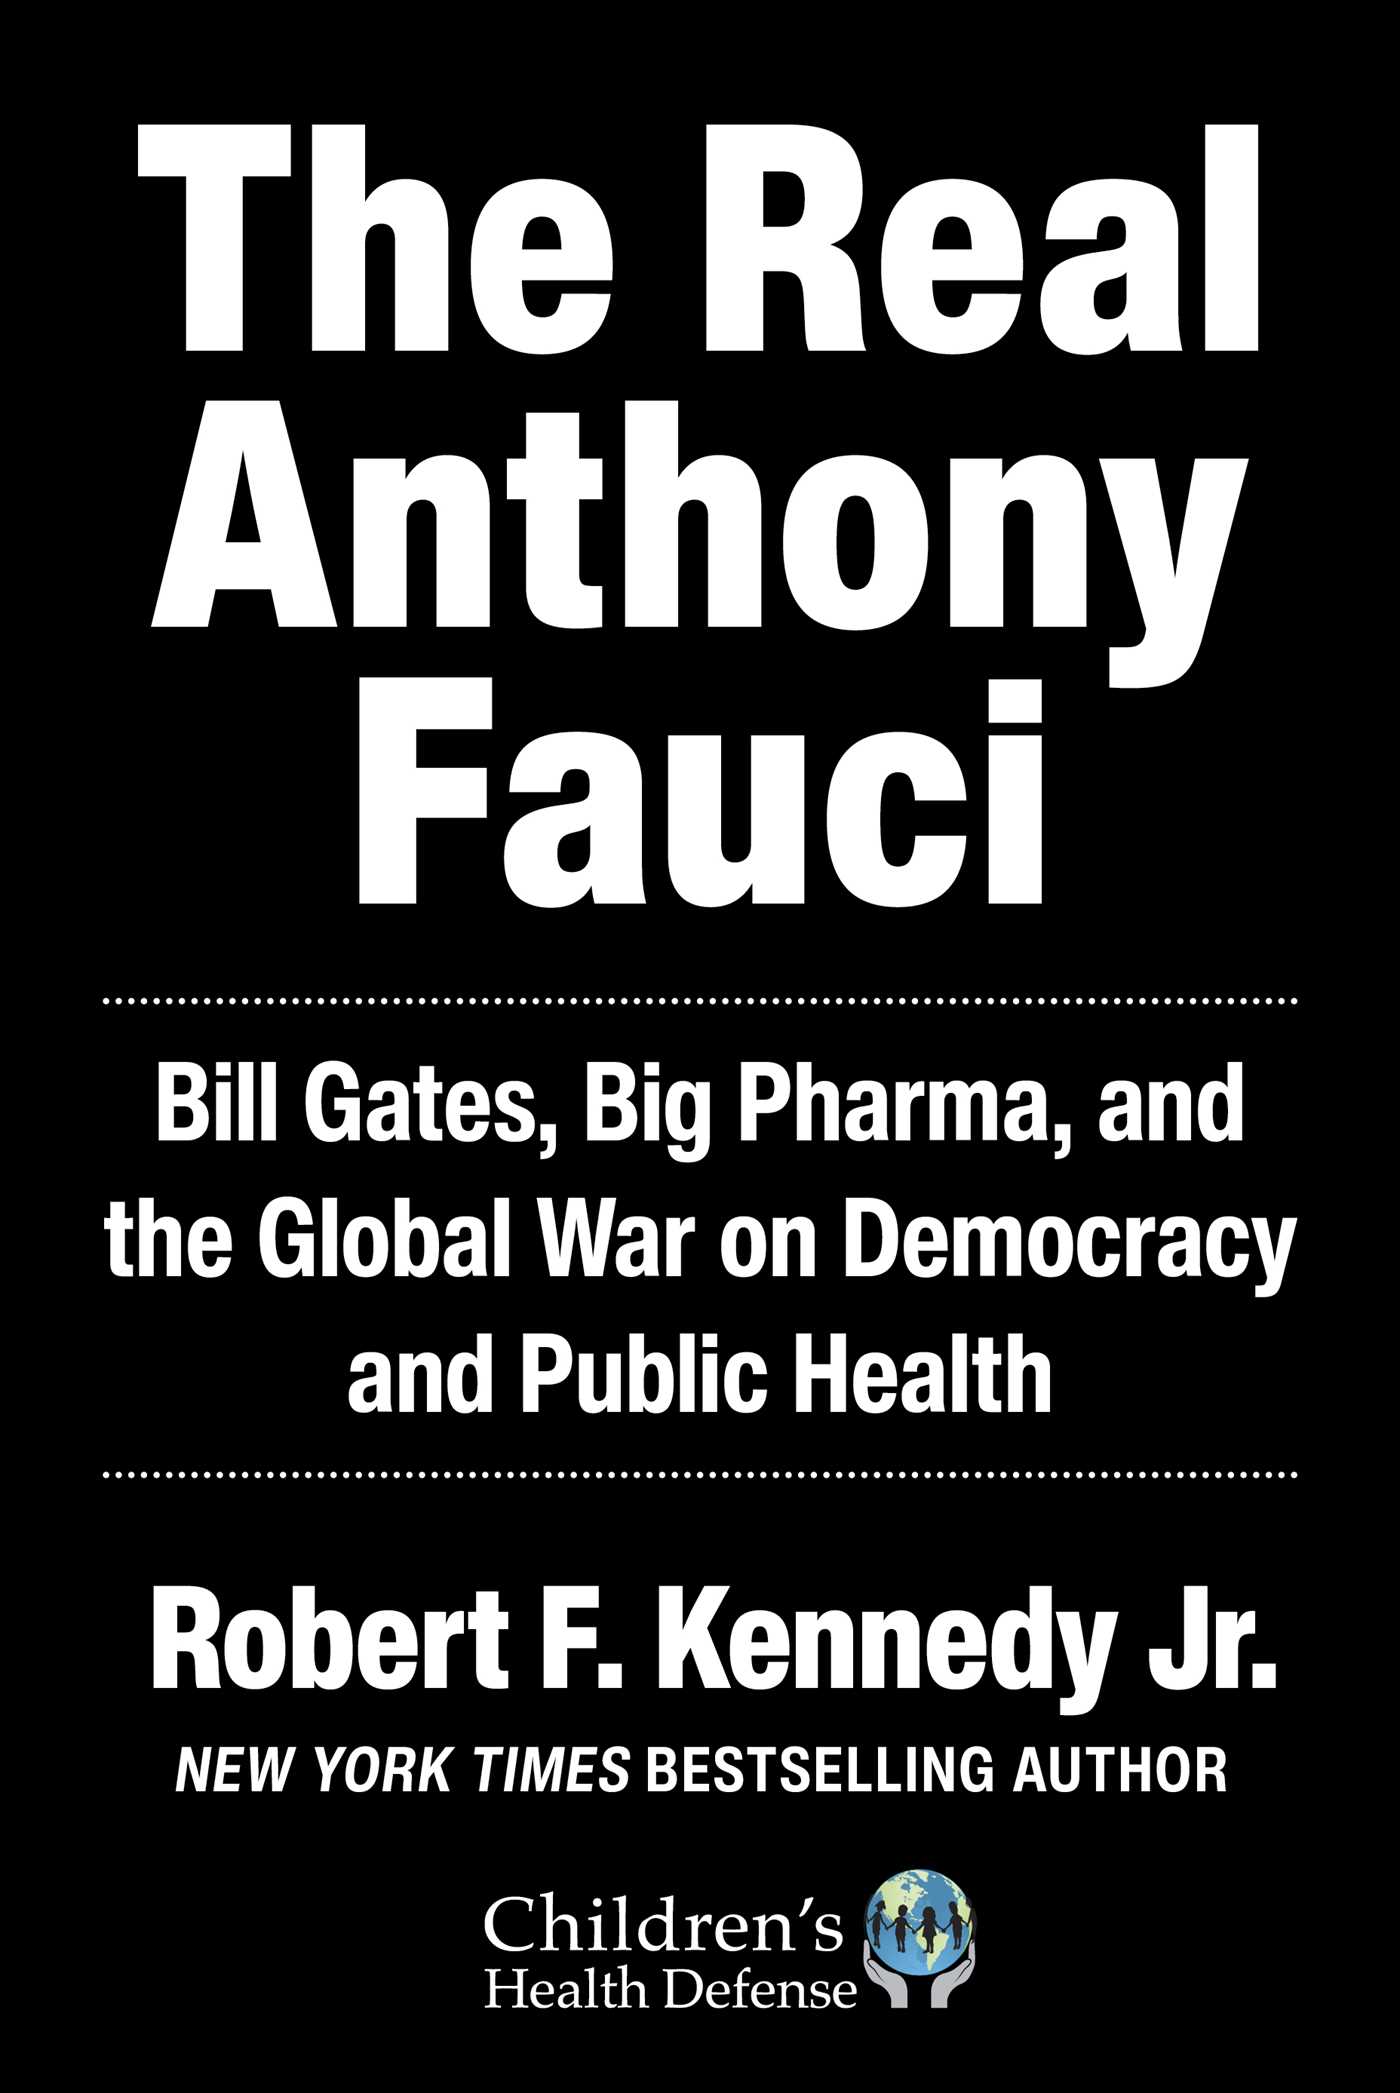 The Real Anthony Fauci Bill Gates, Big Pharma, and the Global War on Democracy and Public Health cover image